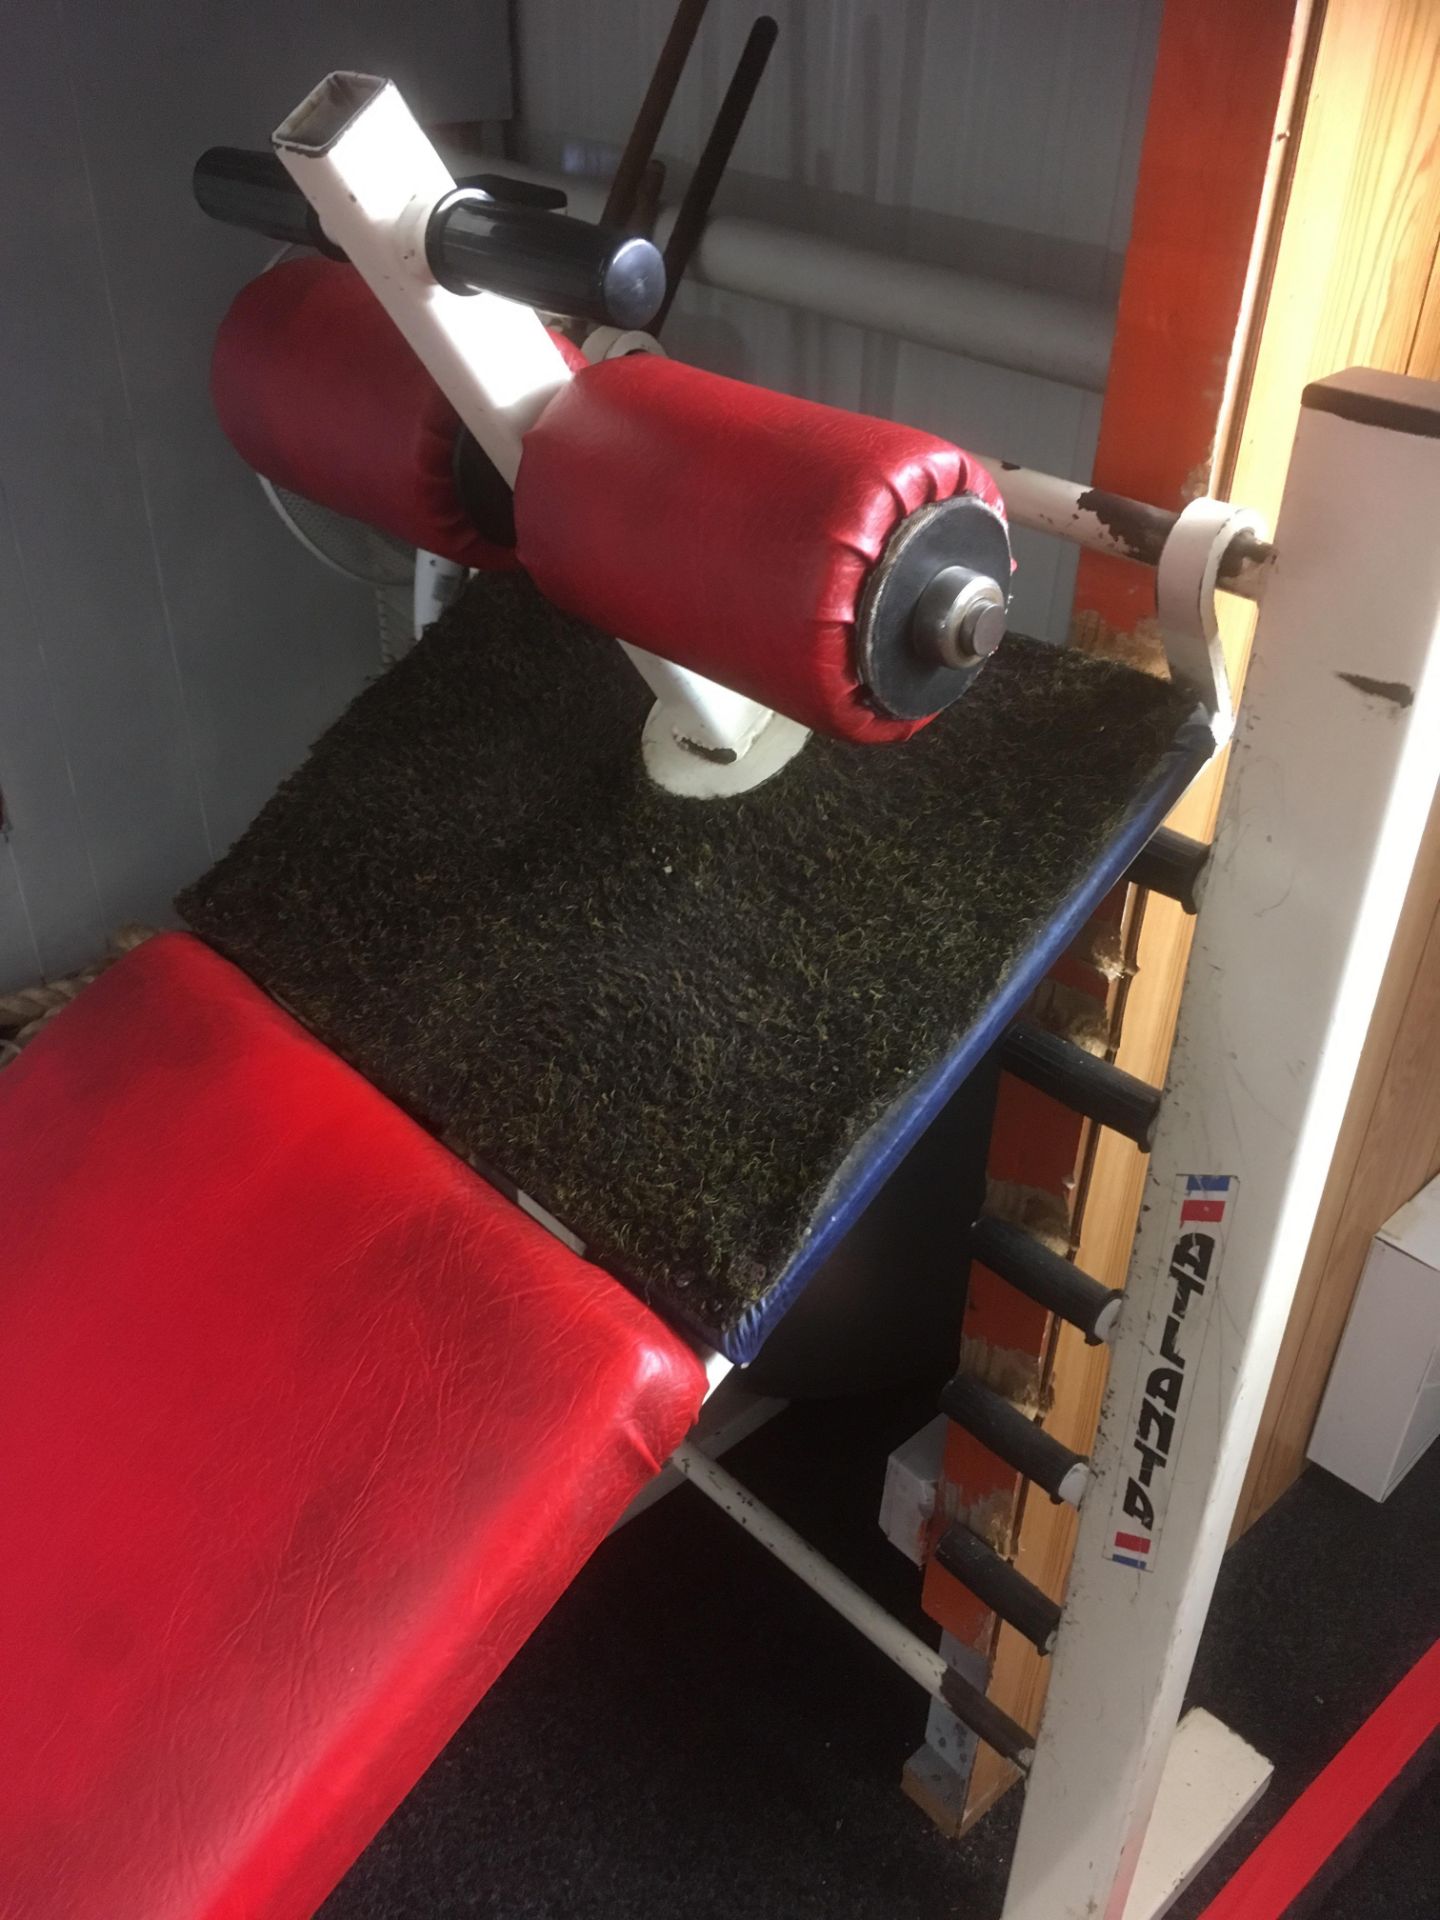 Adjustable Sit Up Bench - Image 2 of 2